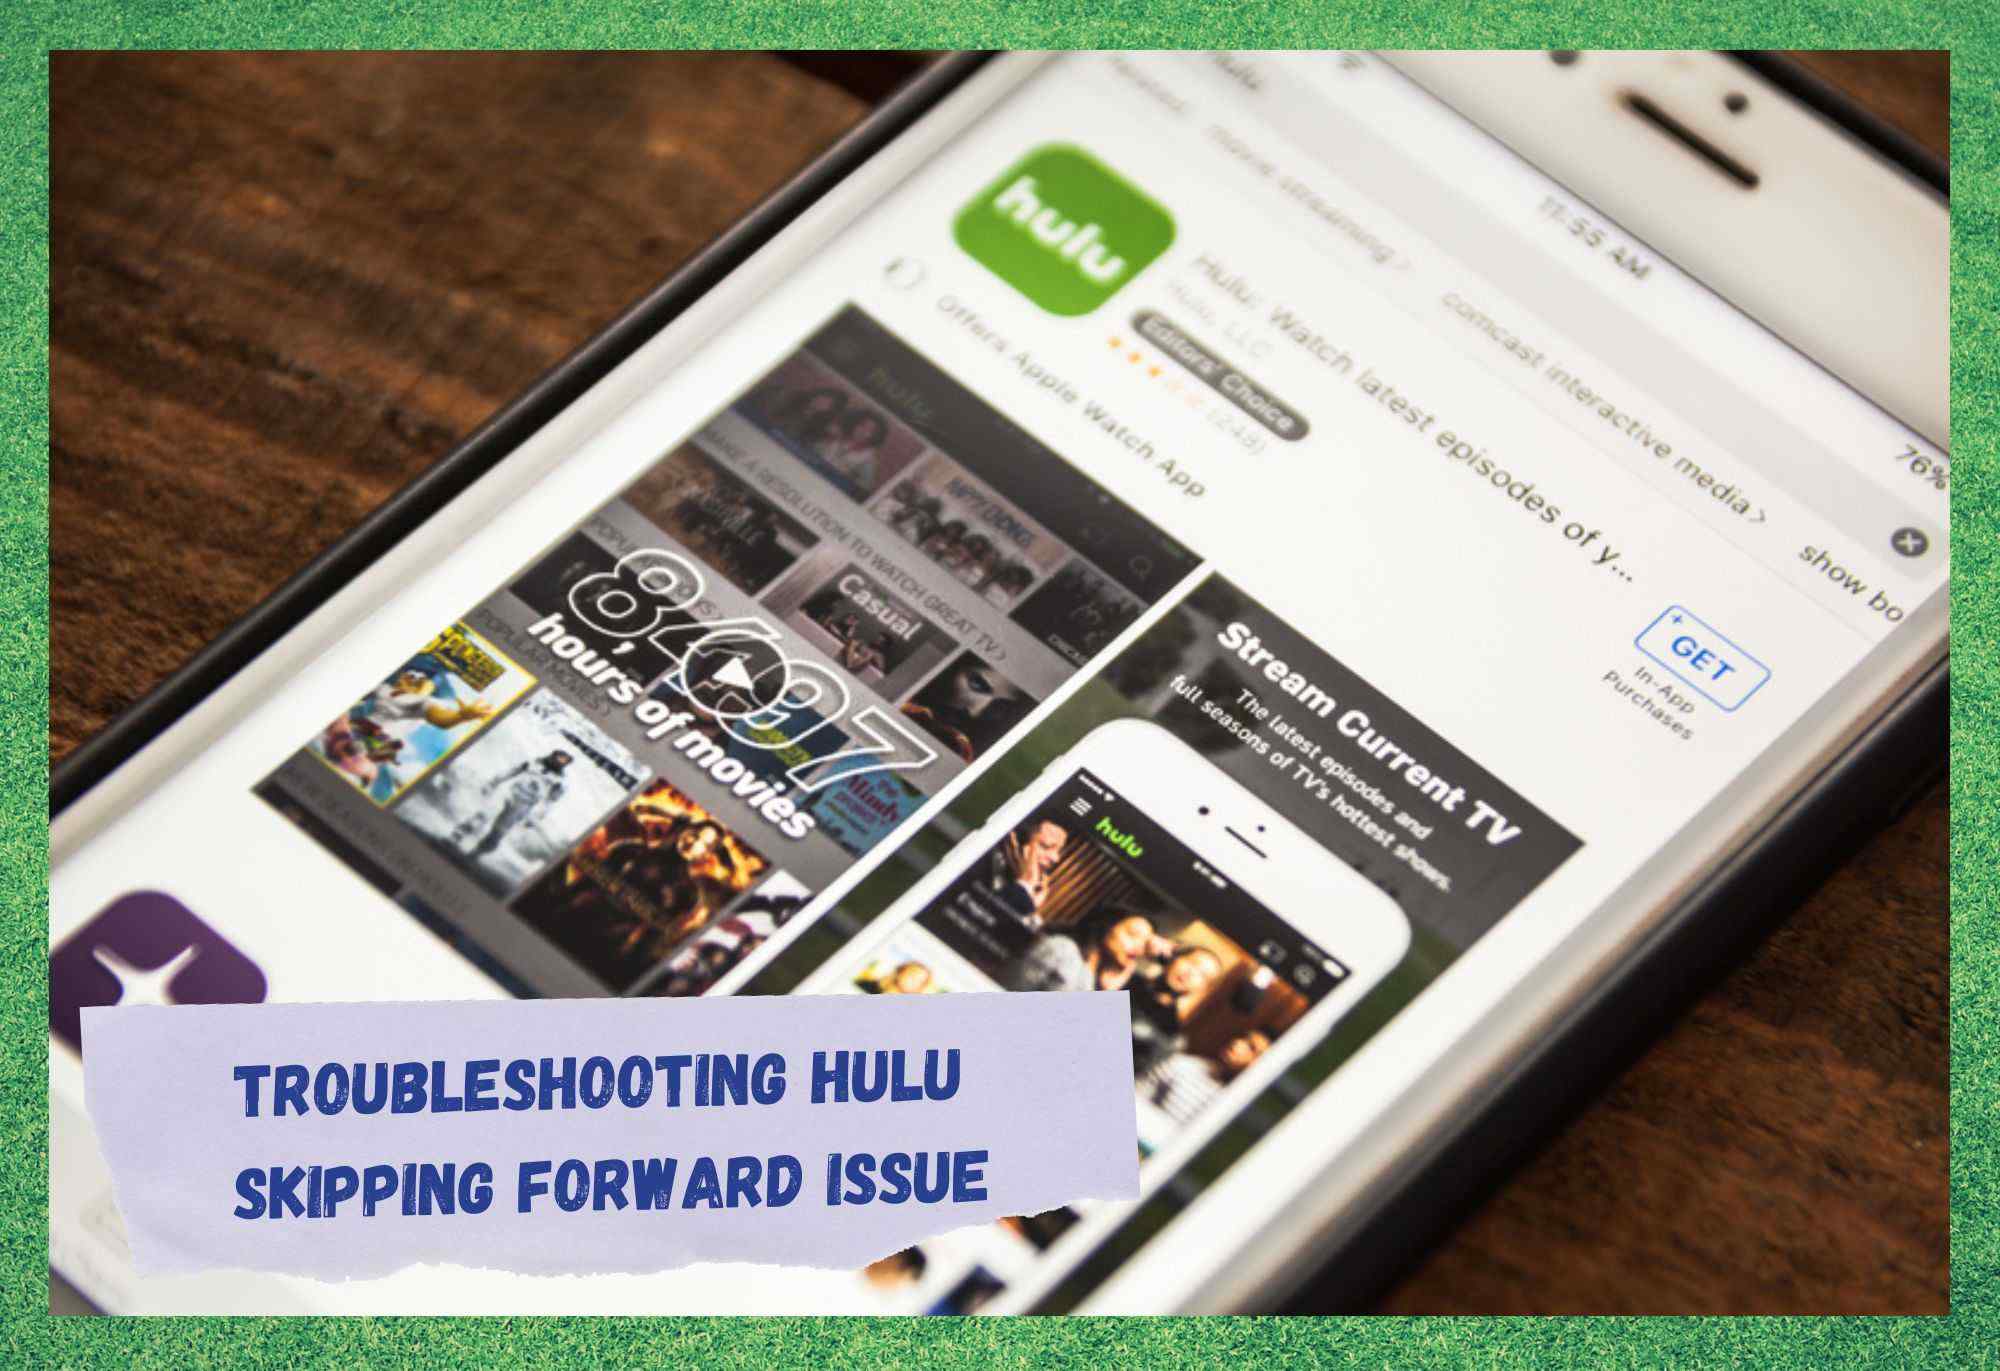 5 Ways To Fix Hulu Skipping Forward Issue - Internet Access Guide